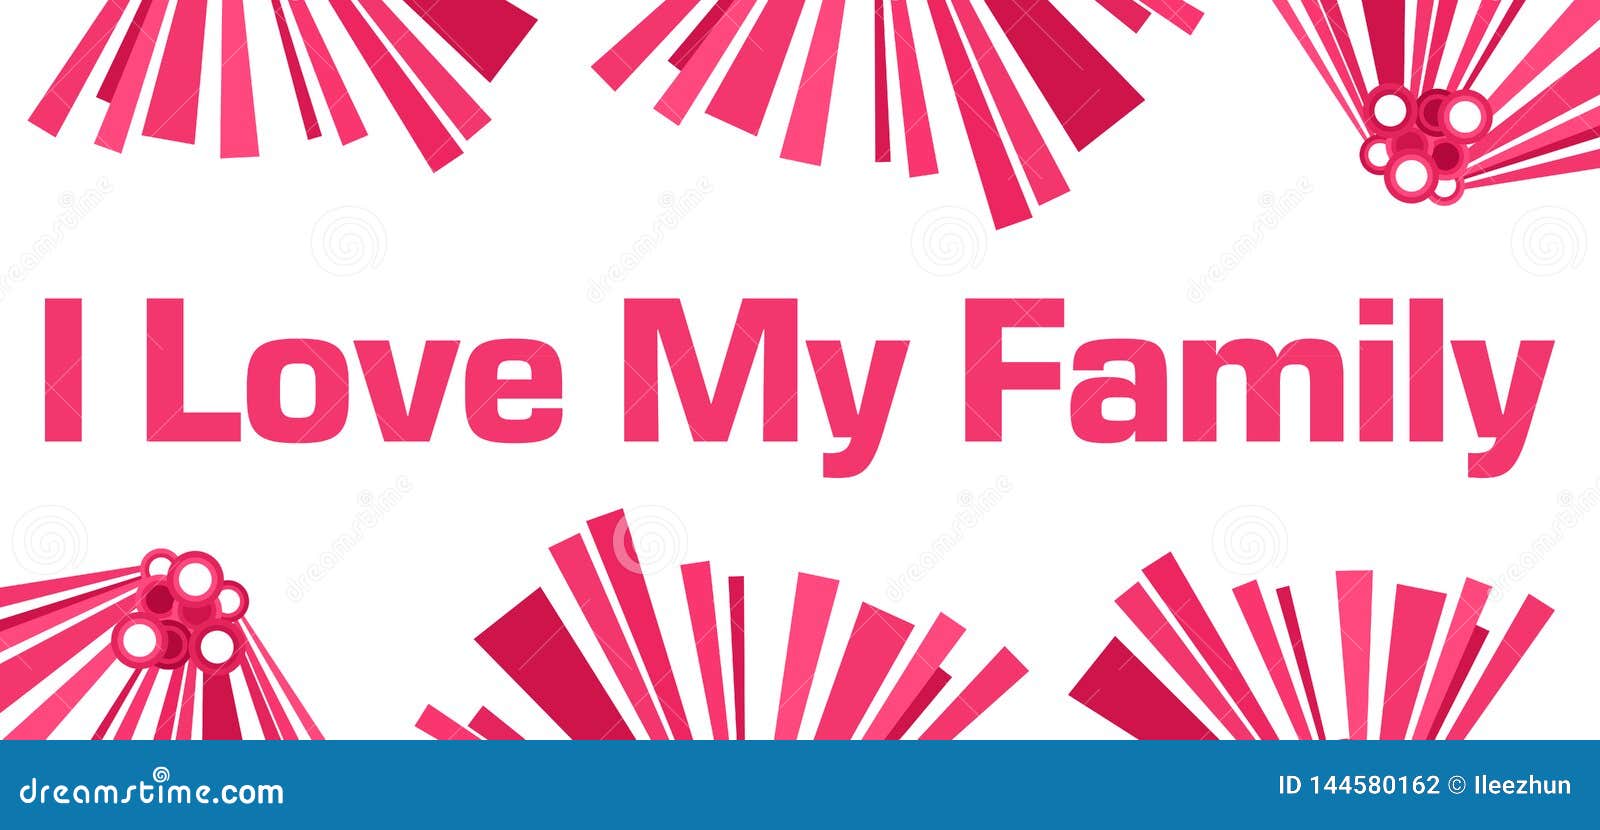 I Love My Family Pink Abstract White Stock Illustration ...